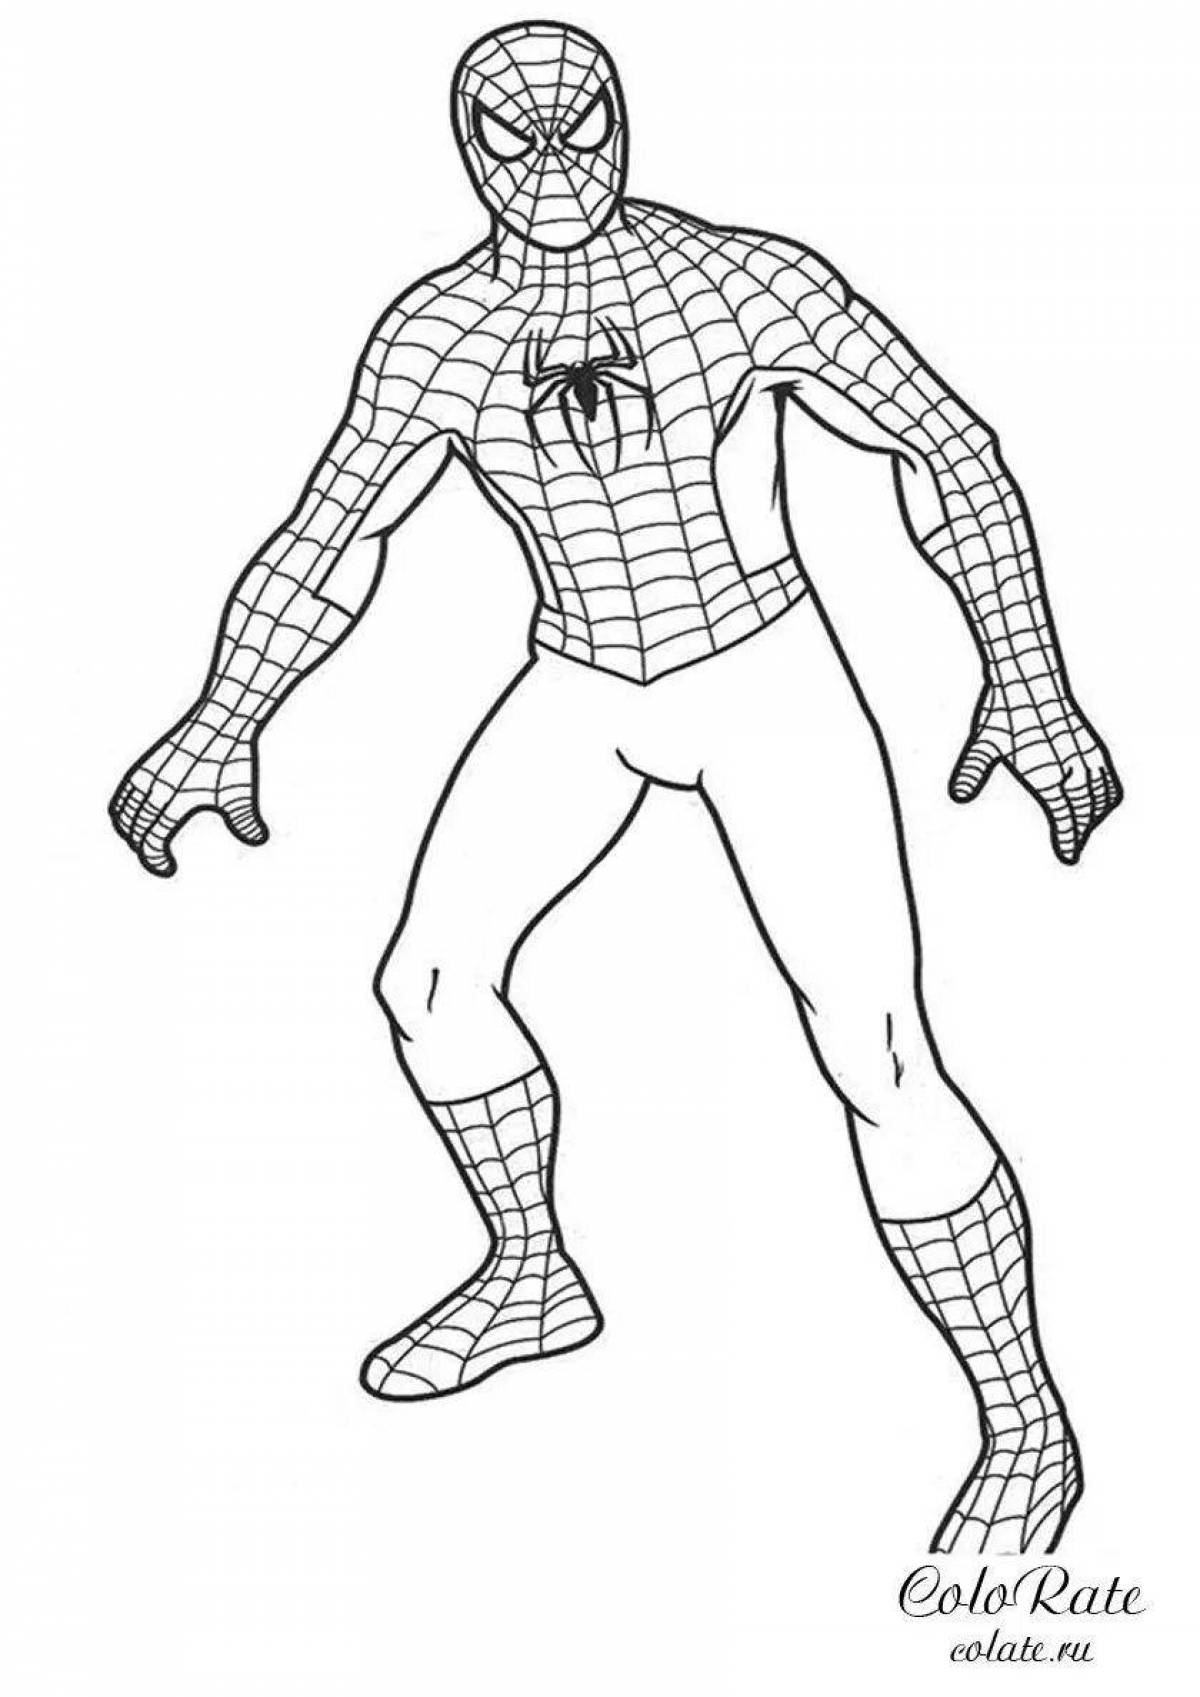 Spider-man inspiration coloring book